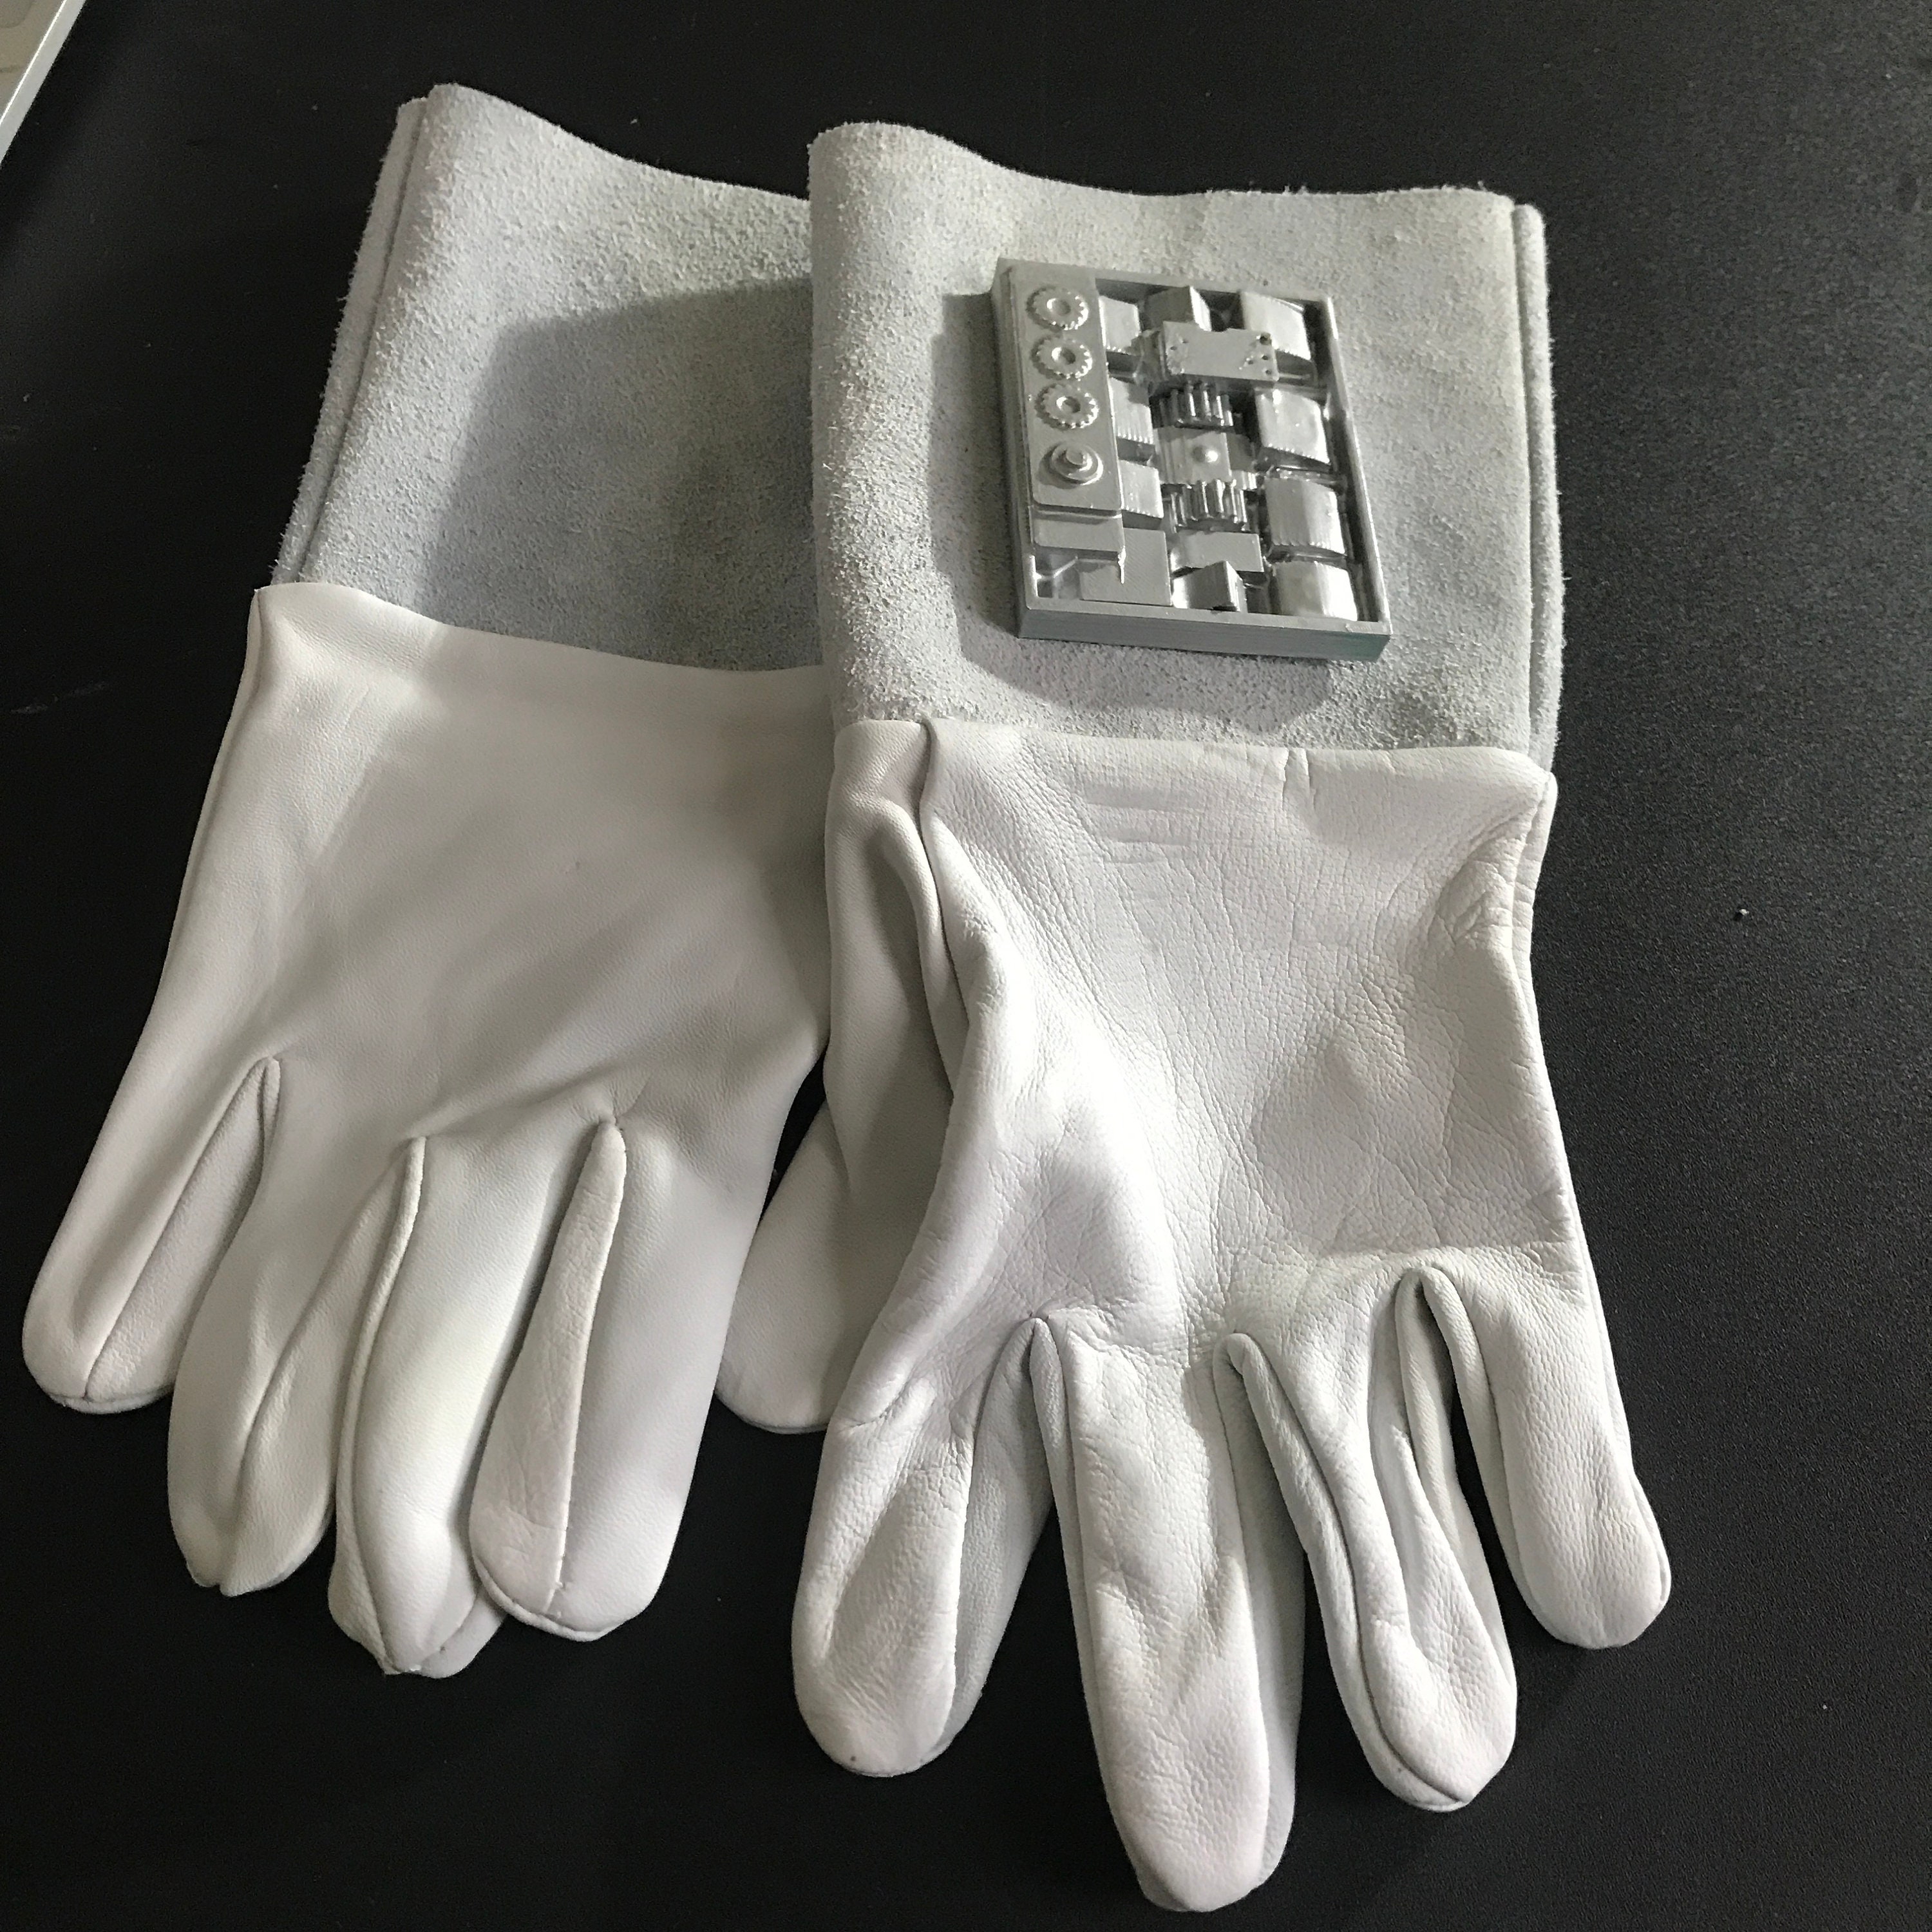 Star Wars Imperial Faux Leather Gloves Size: Medium/Large